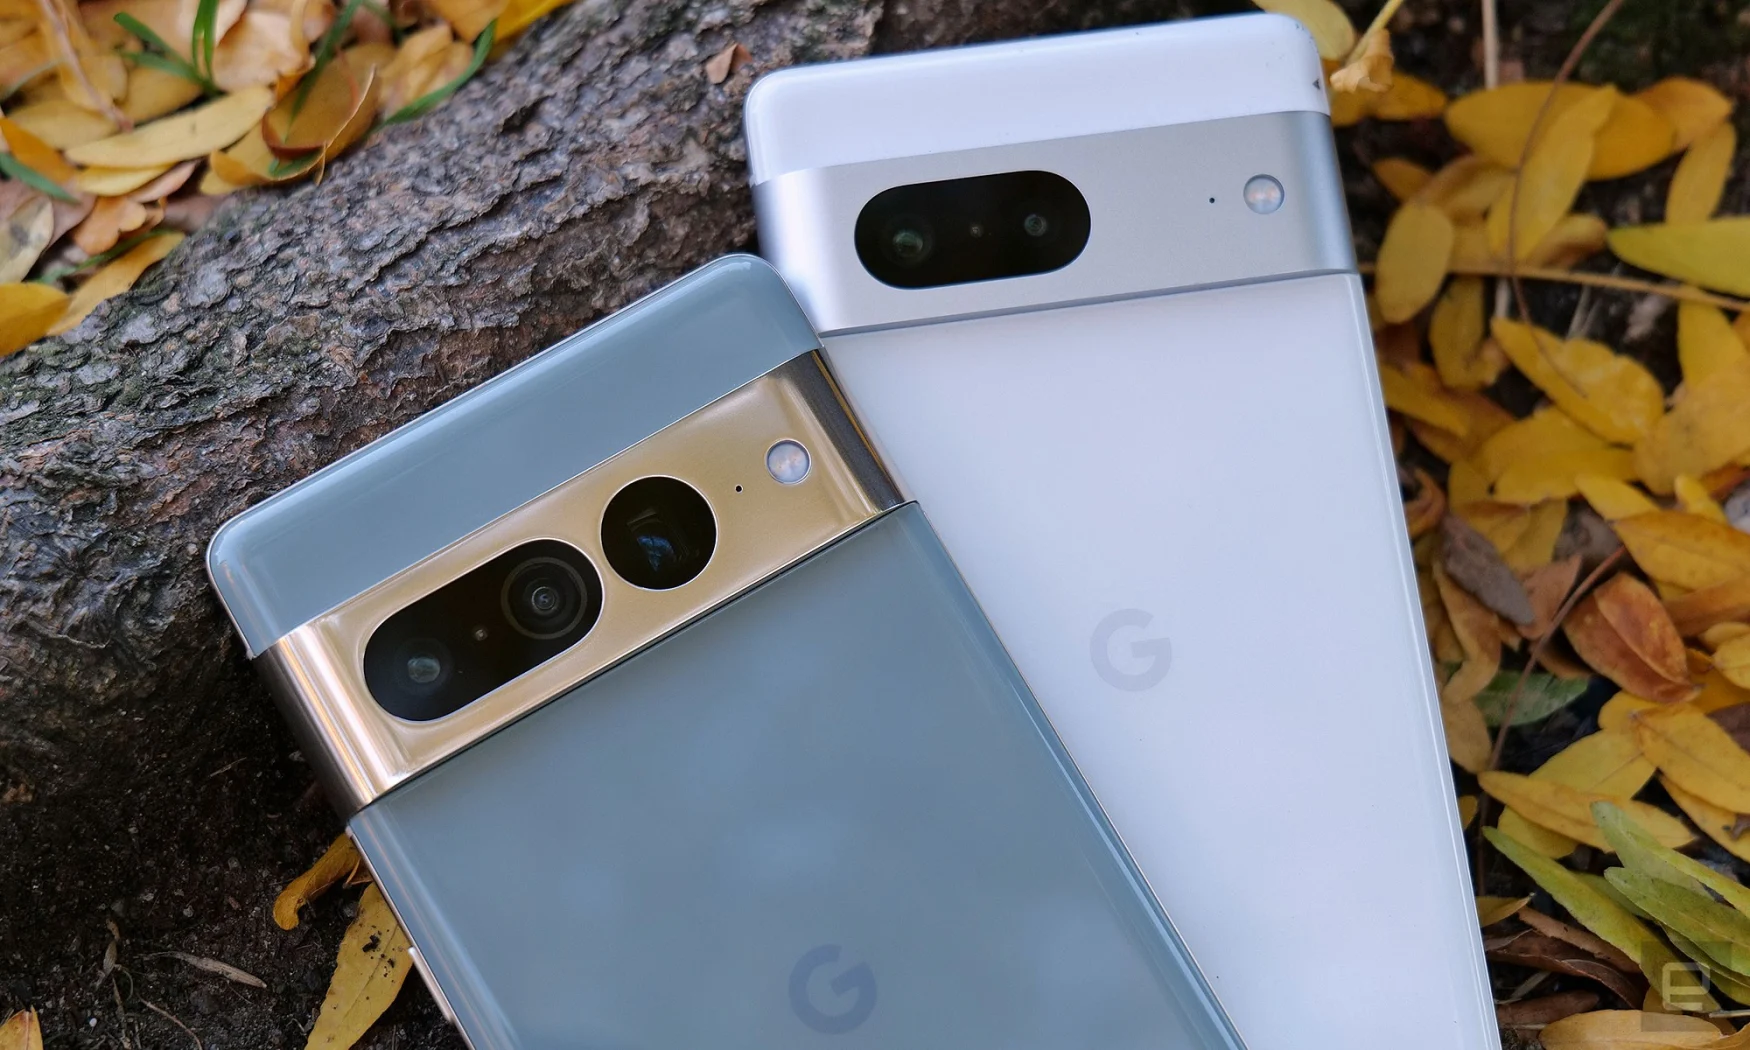 The rear cameras on the Pixel 7 and Pixel 7 Pro produce some of the highest quality images on any phone available today. 